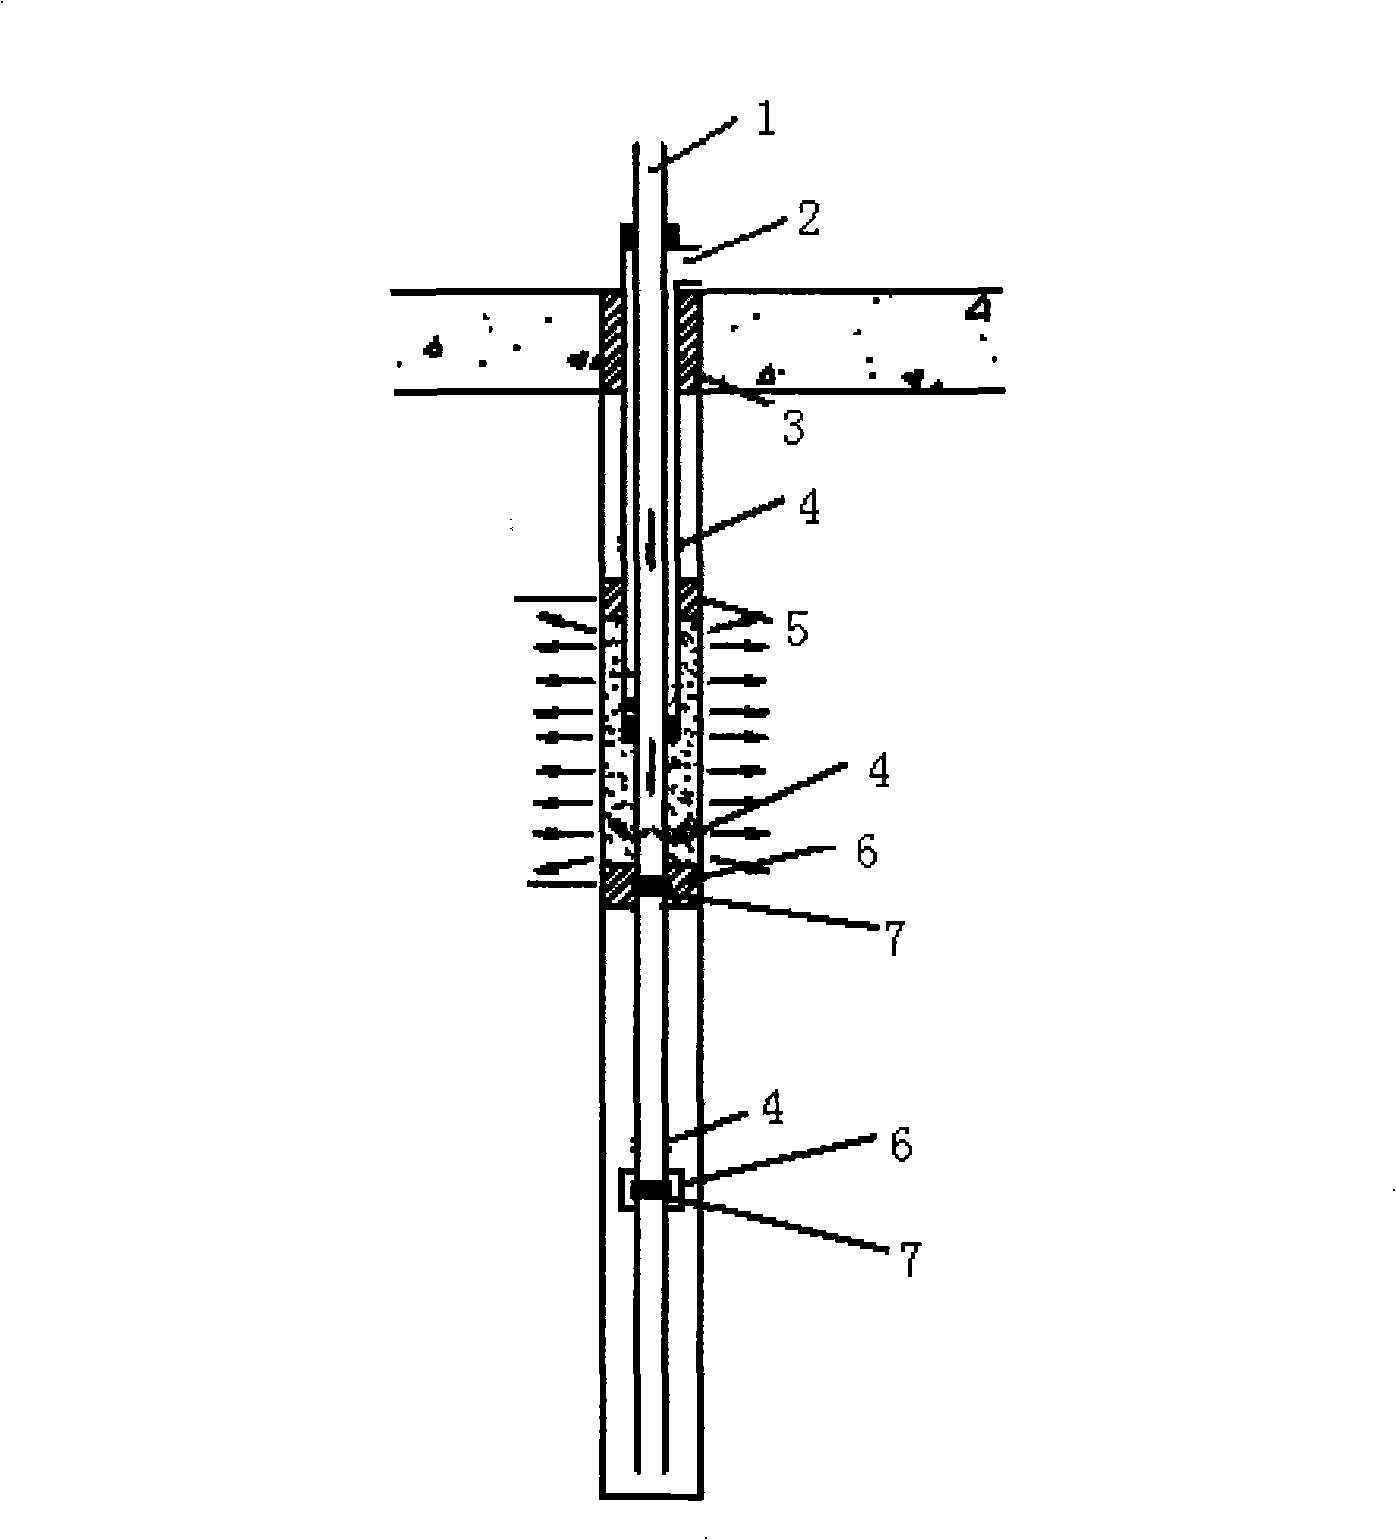 Consolidated grouting method for anchoring cement of bedrock contact segment